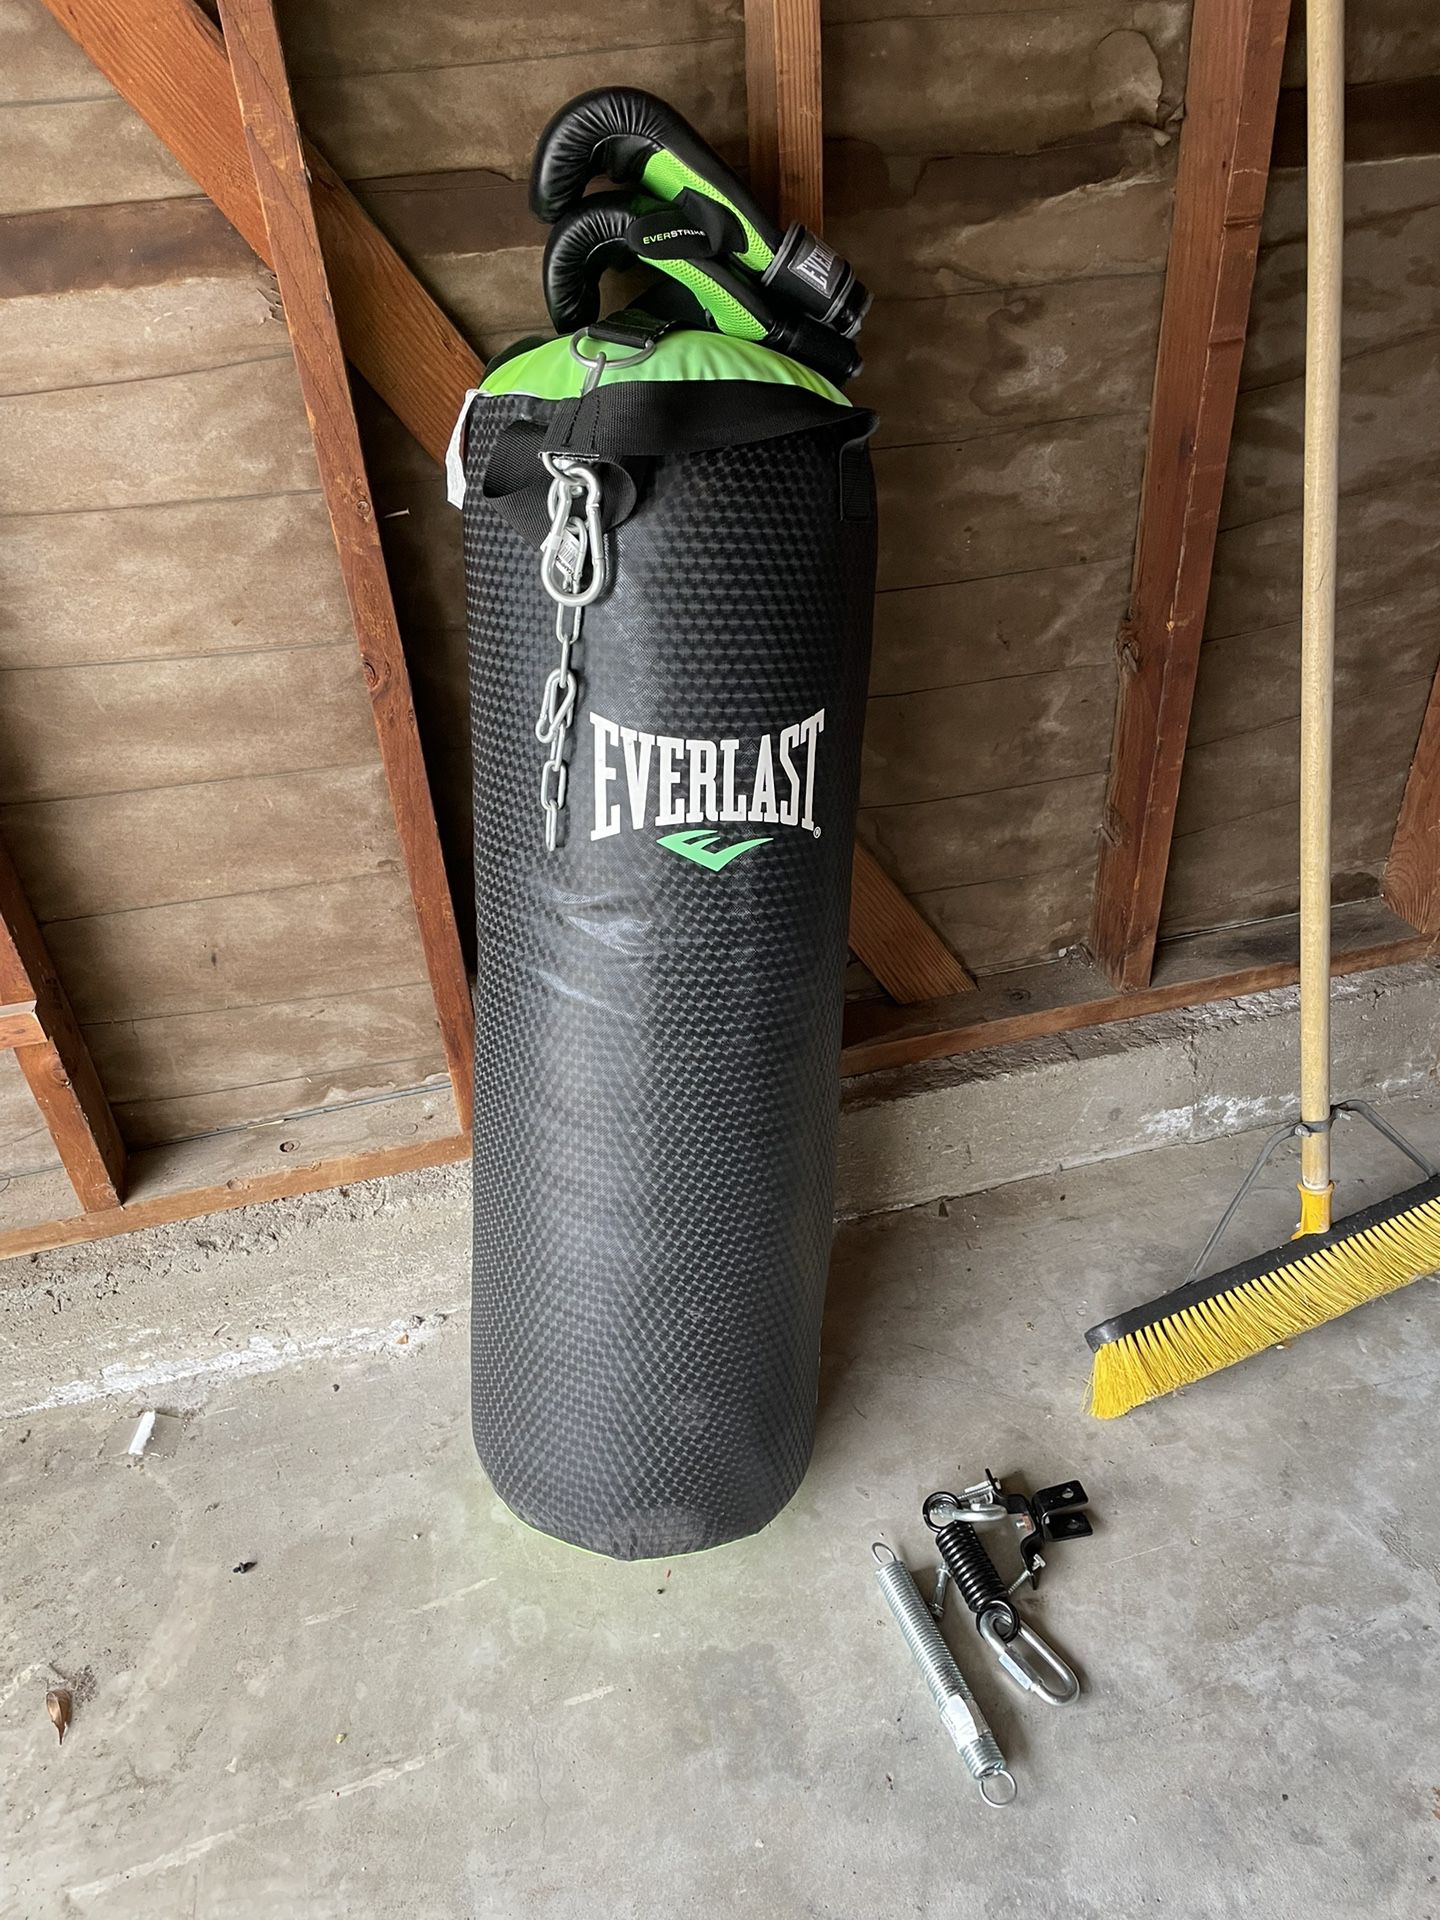 Everlast Punching Bag $65 OBO for Sale in San Diego, CA - OfferUp